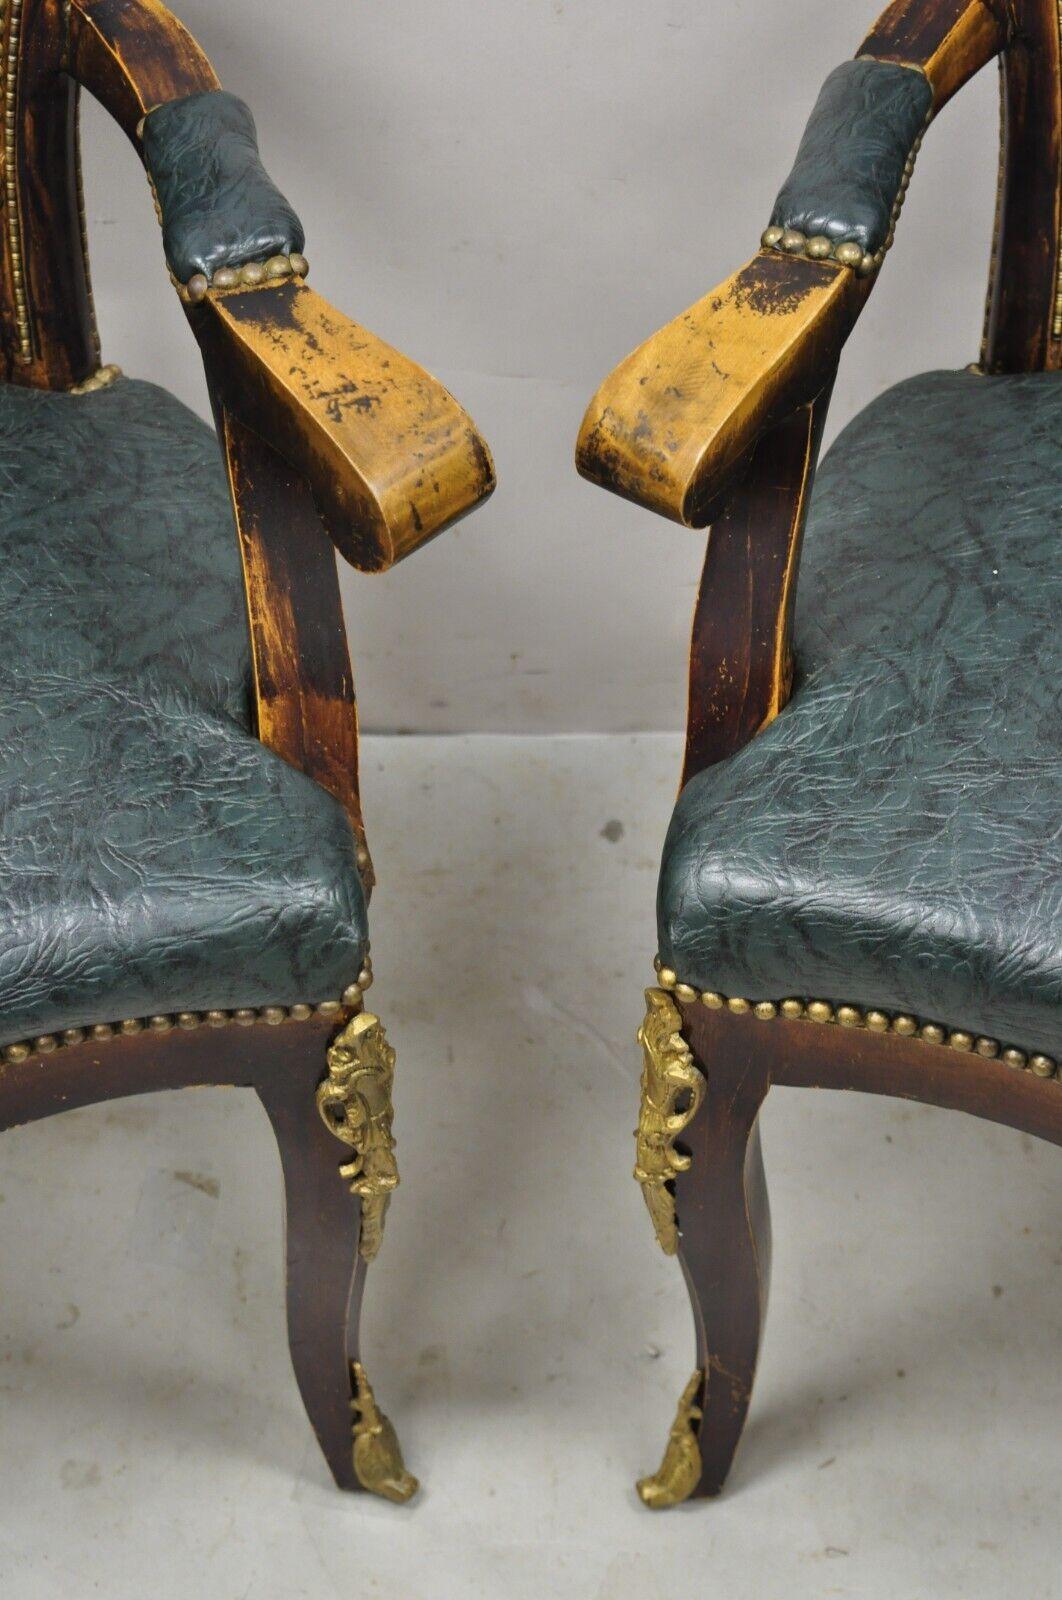 Vintage French Louis XV Style Solid Wood Bronze Ormolu Arm Chairs - a Pair For Sale 7